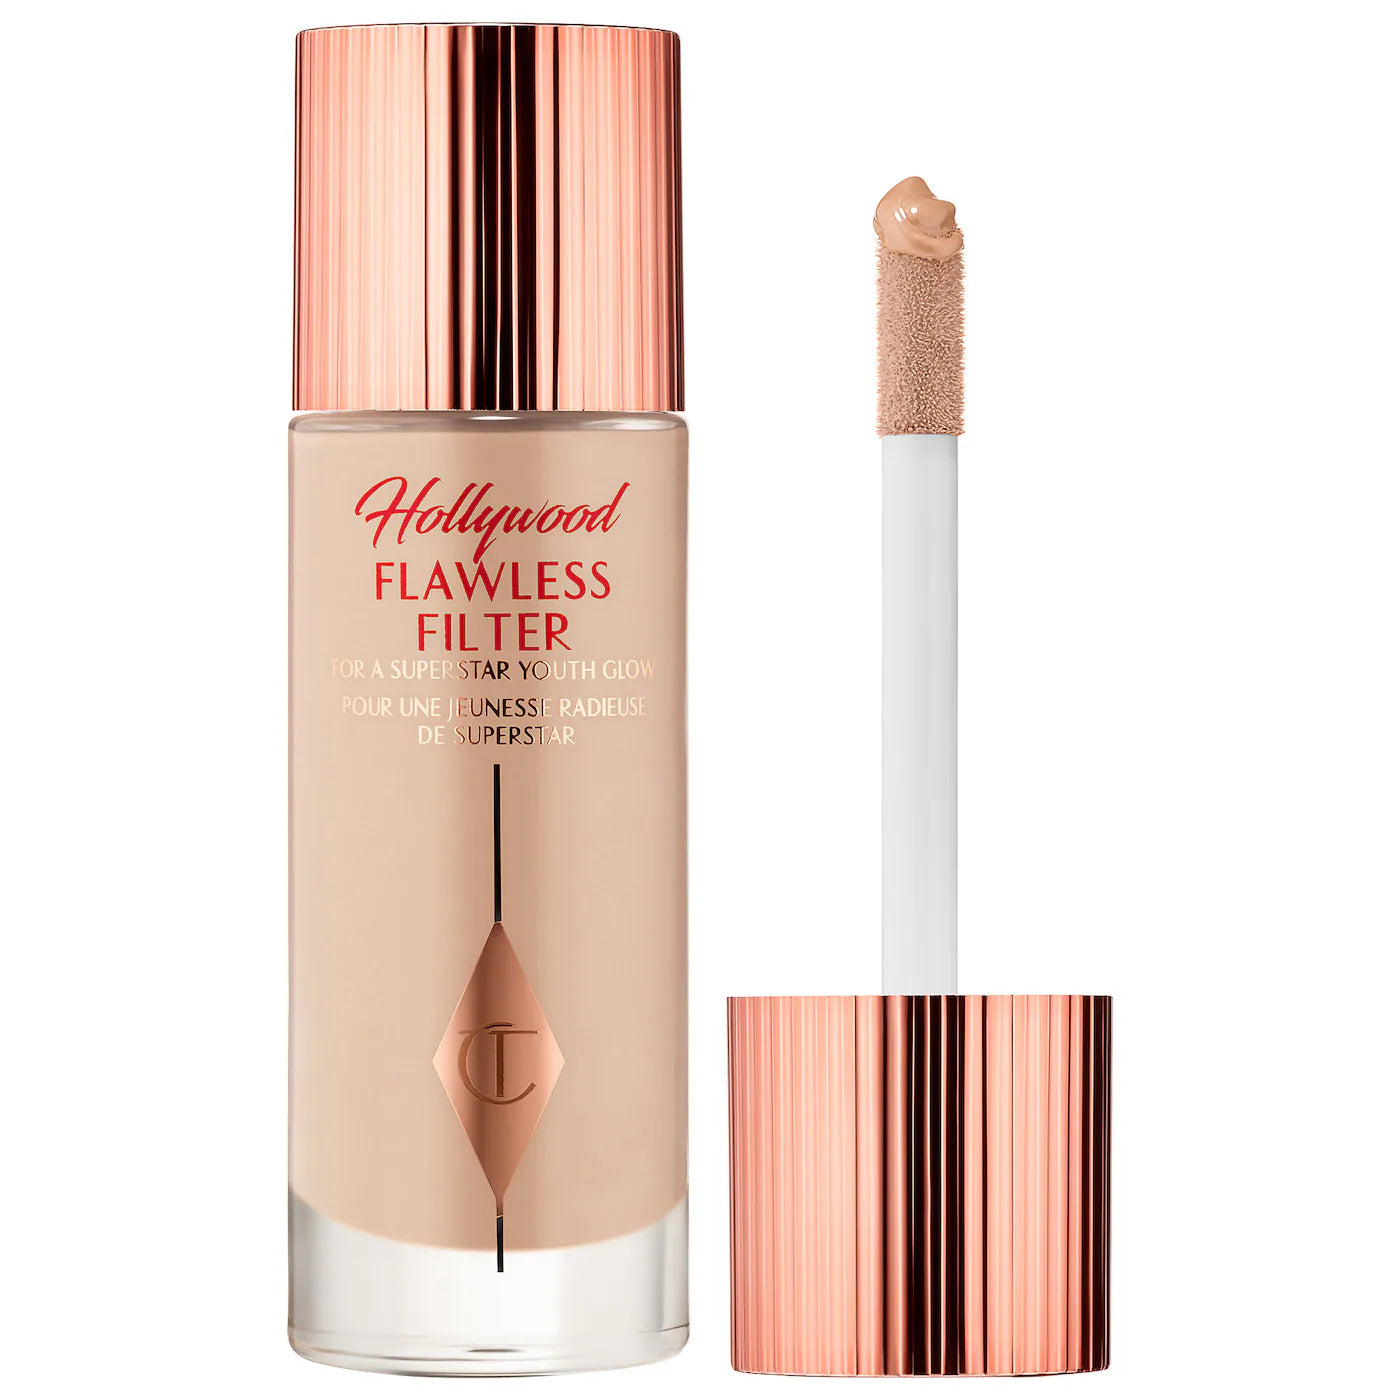 Hollywood Flawless Filter - Charlotte Tilbury